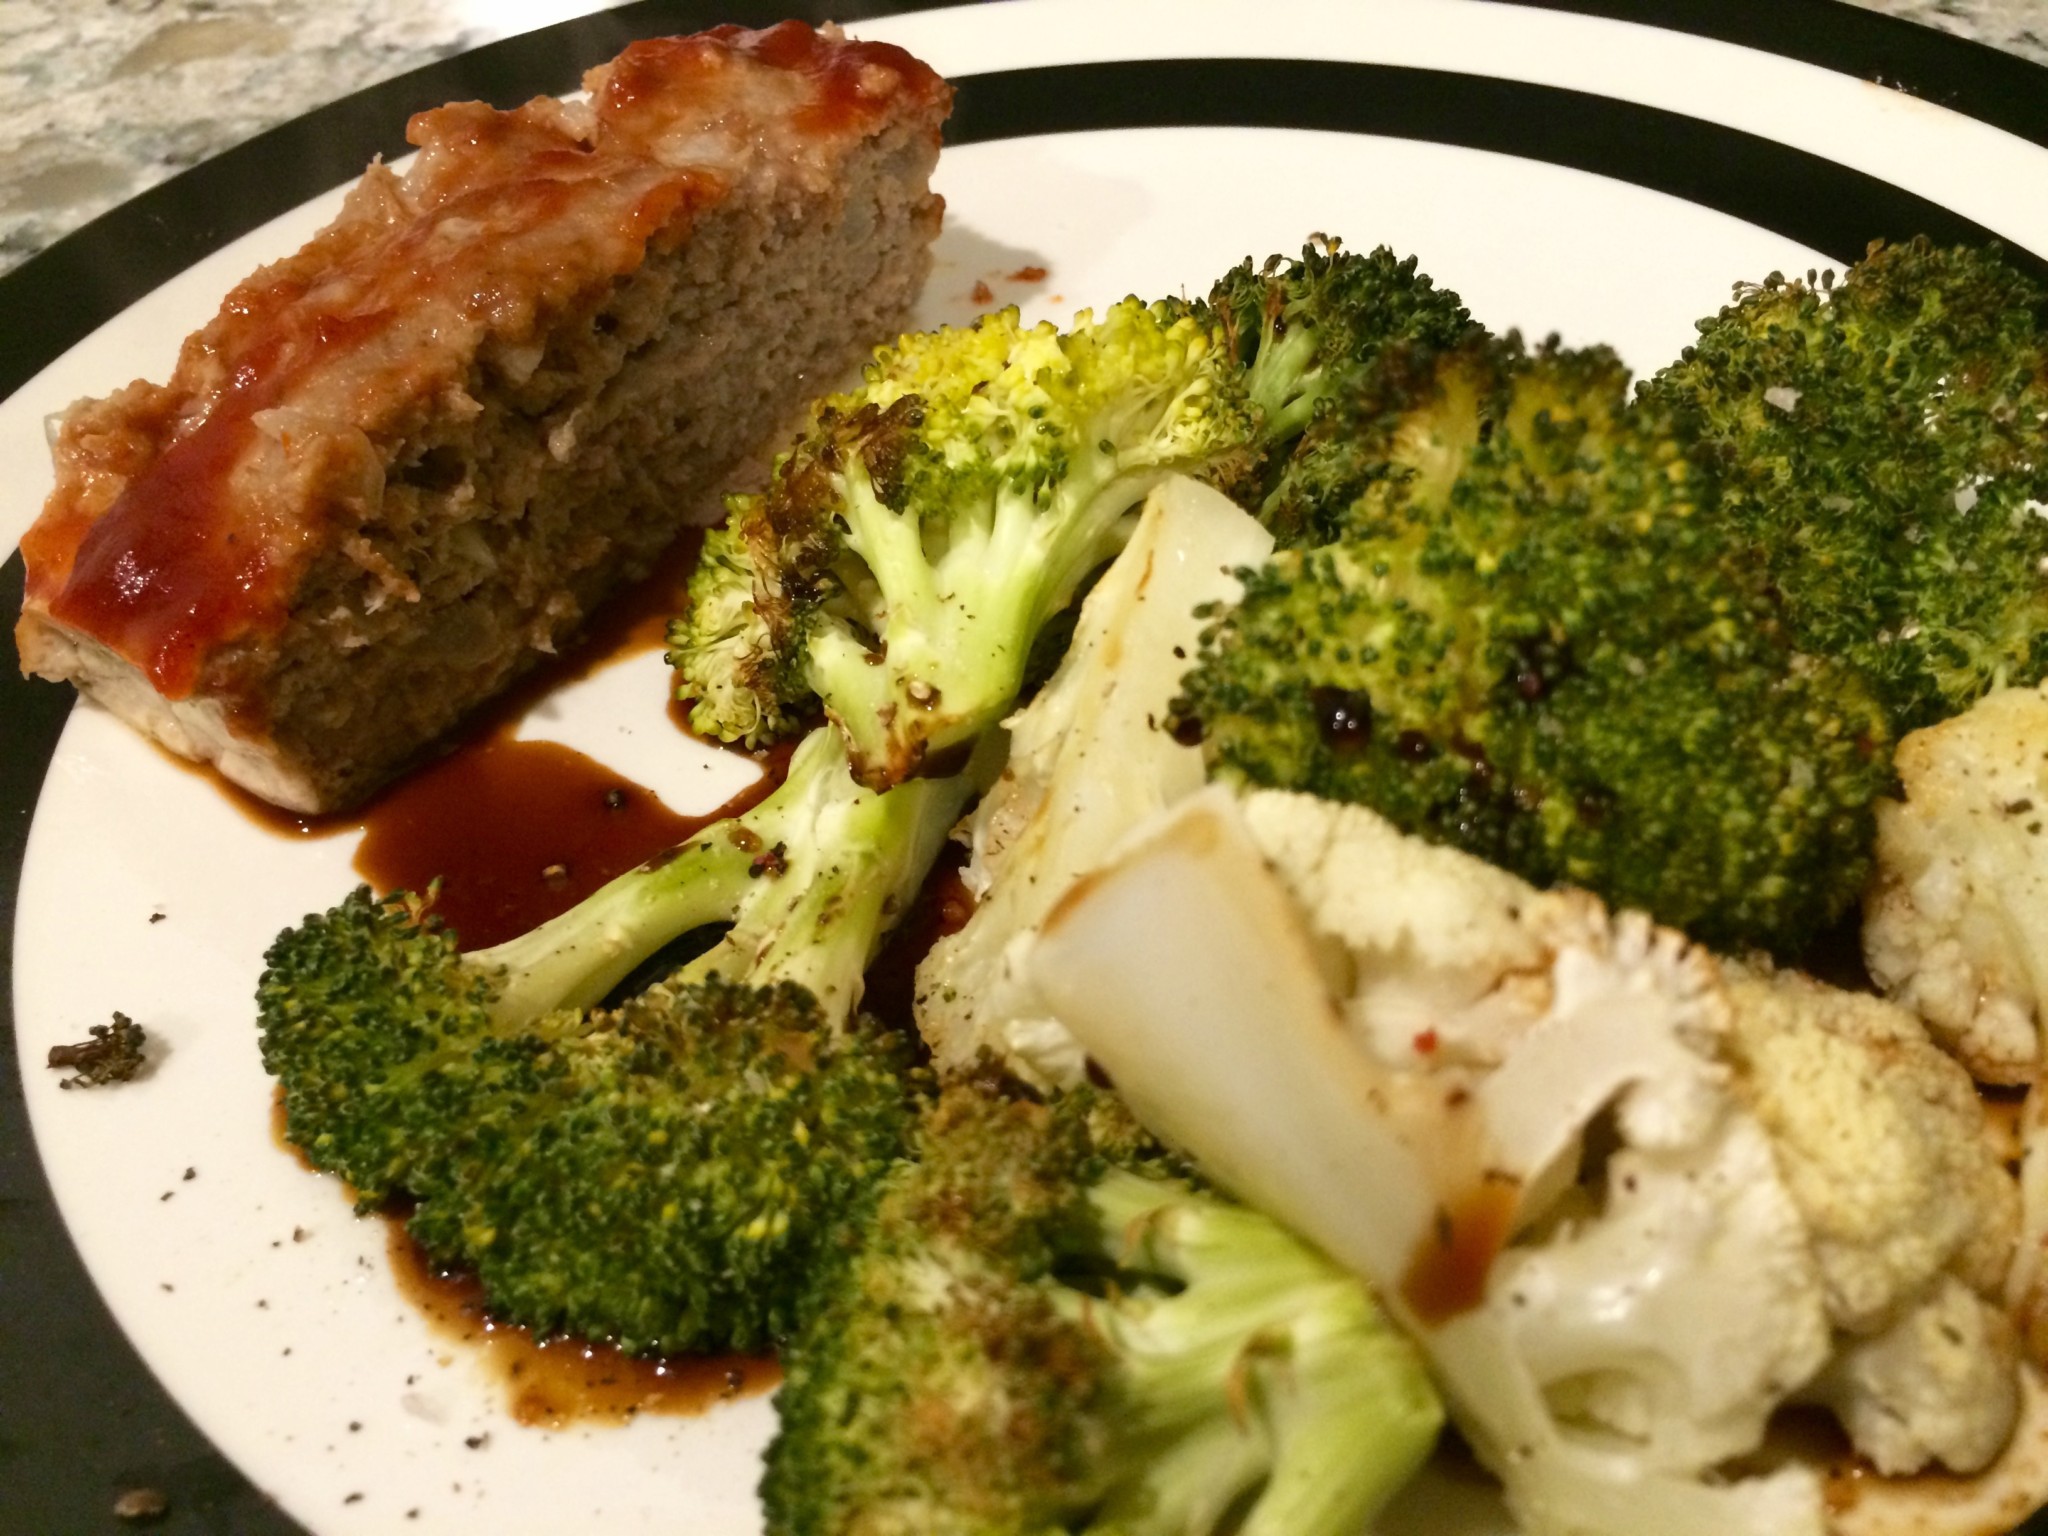 30 Minute Dinner Turkey Meatloaf with Roasted Broccoli & Cauliflower Floret Recipe. A Healthier Alternative to the classic dish.